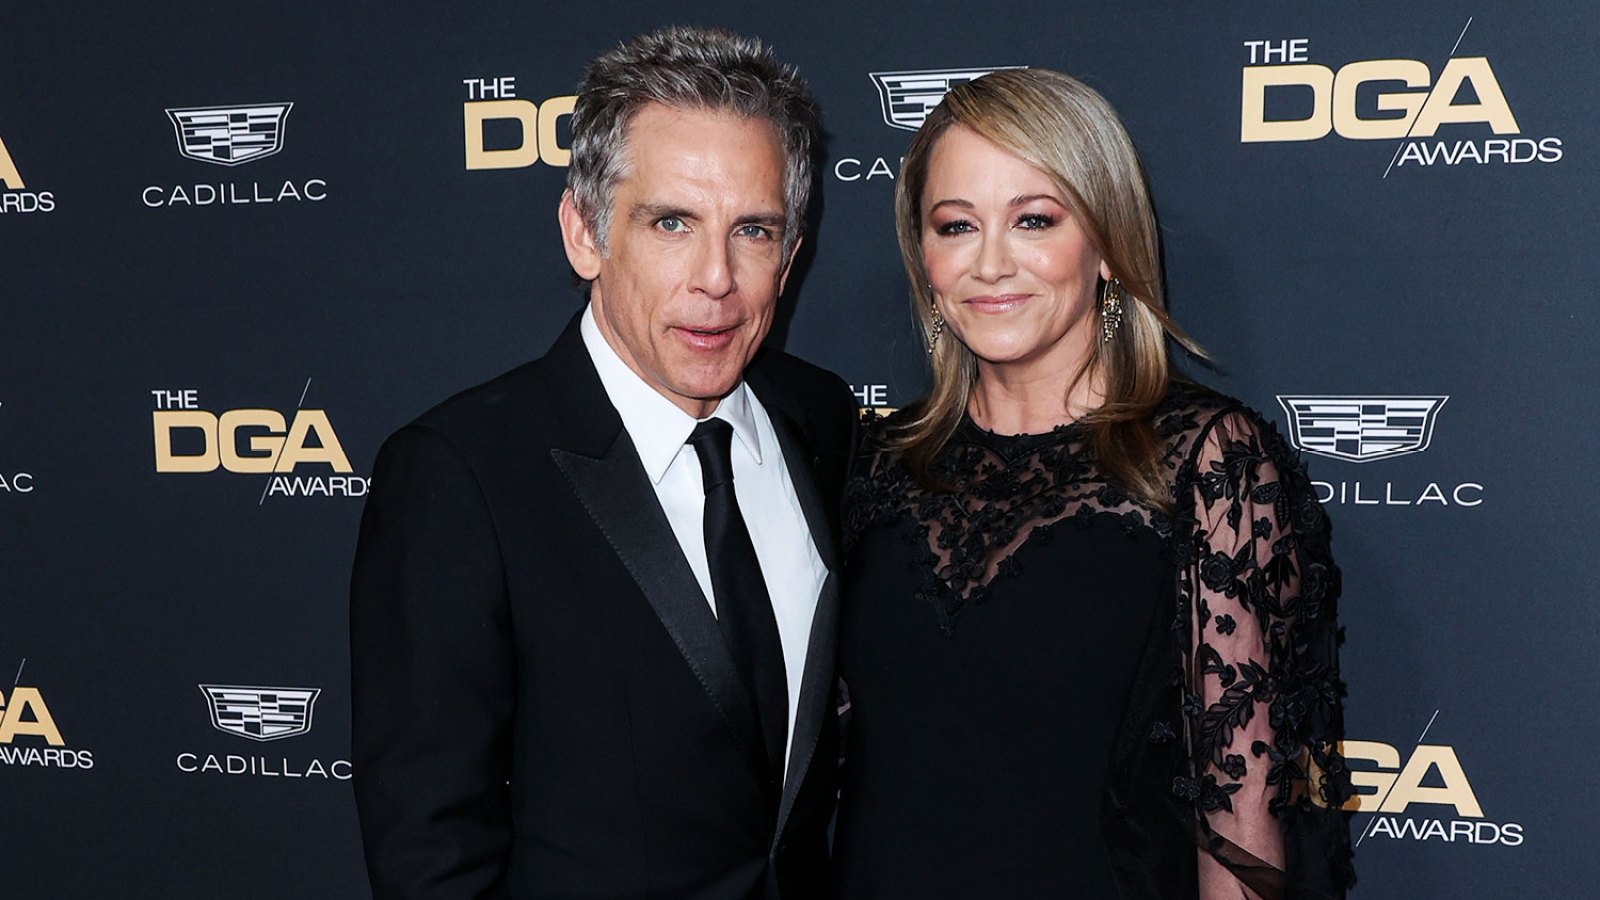 Ben Stiller and Christine Taylor Hit Tribeca Film Festival Red Carpet With Daughter Ella One Year After Reconciliation